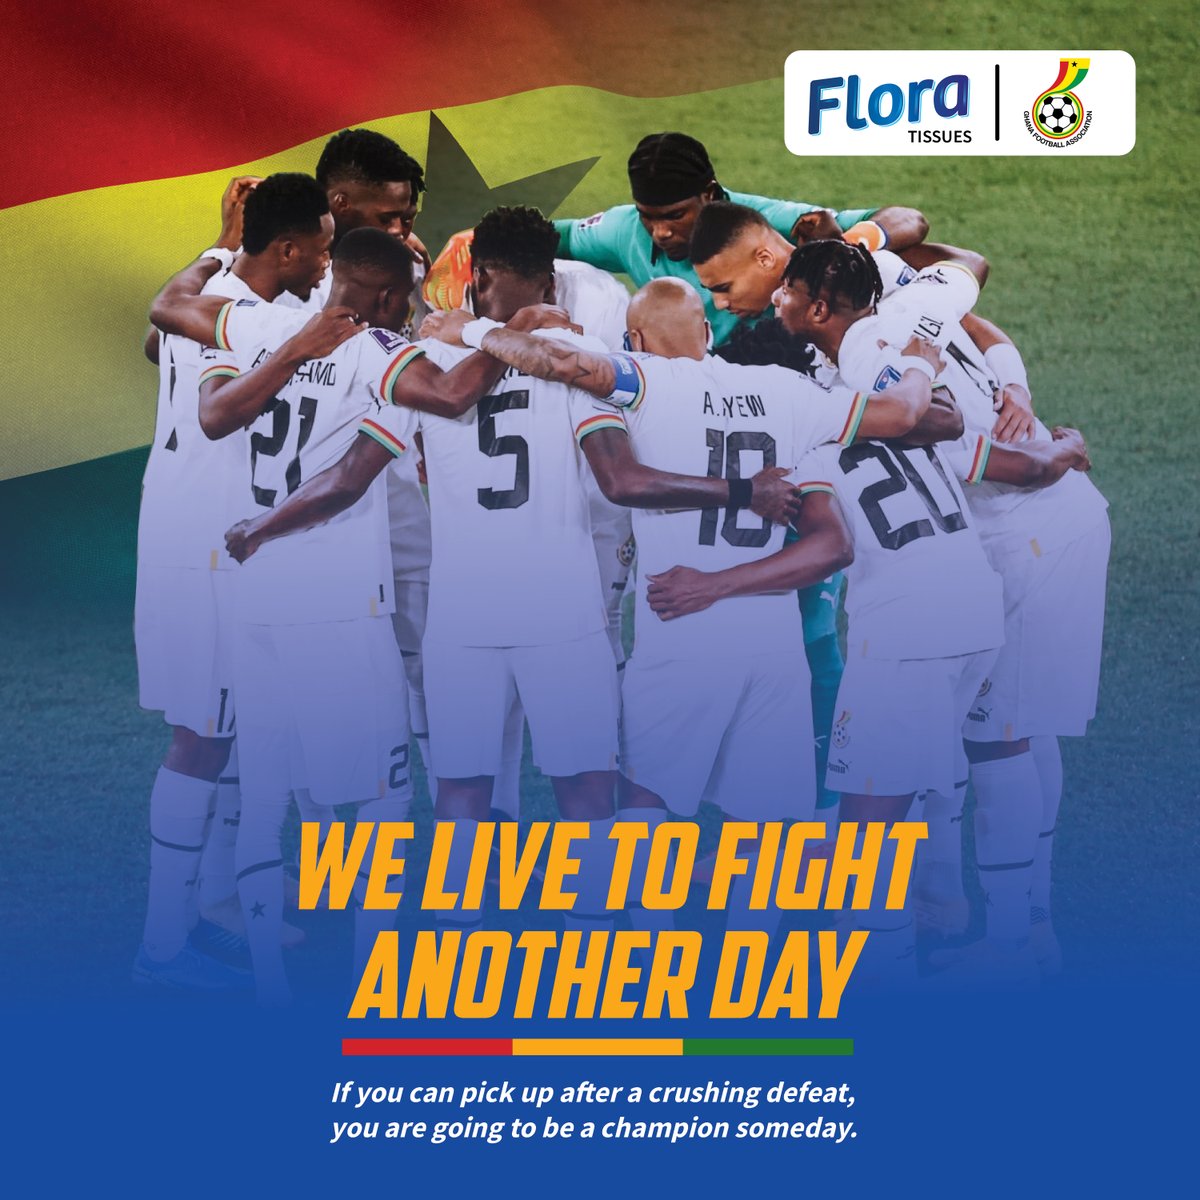 It is certain that you will come back stronger. #GoBlackStars #goghana 

#iuseflora
#floragoal 
#bringbackthelove